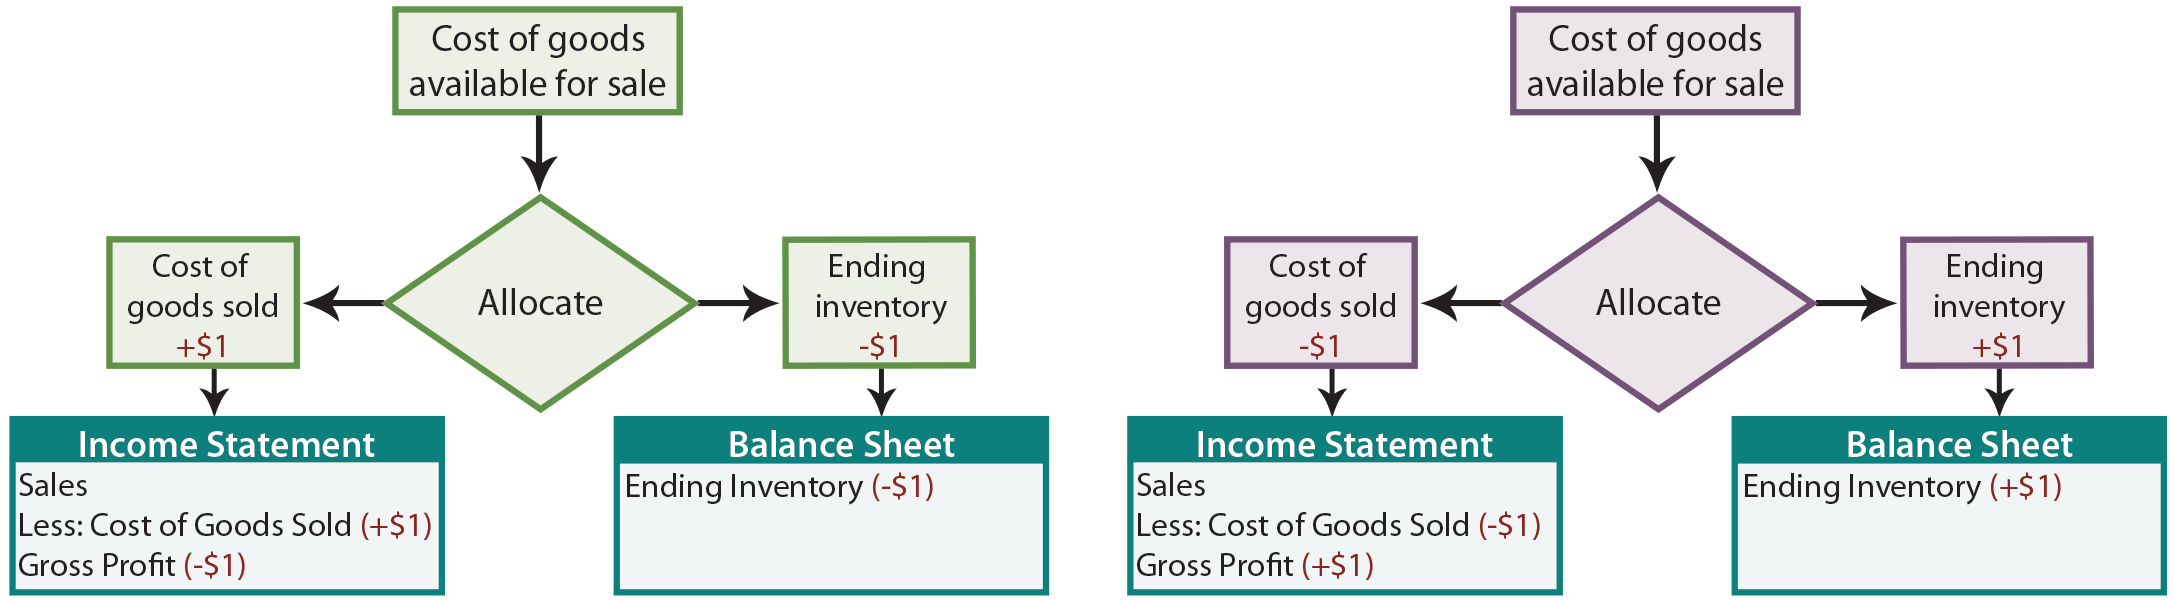 Allocation Process for Goods Available for Sale illustration